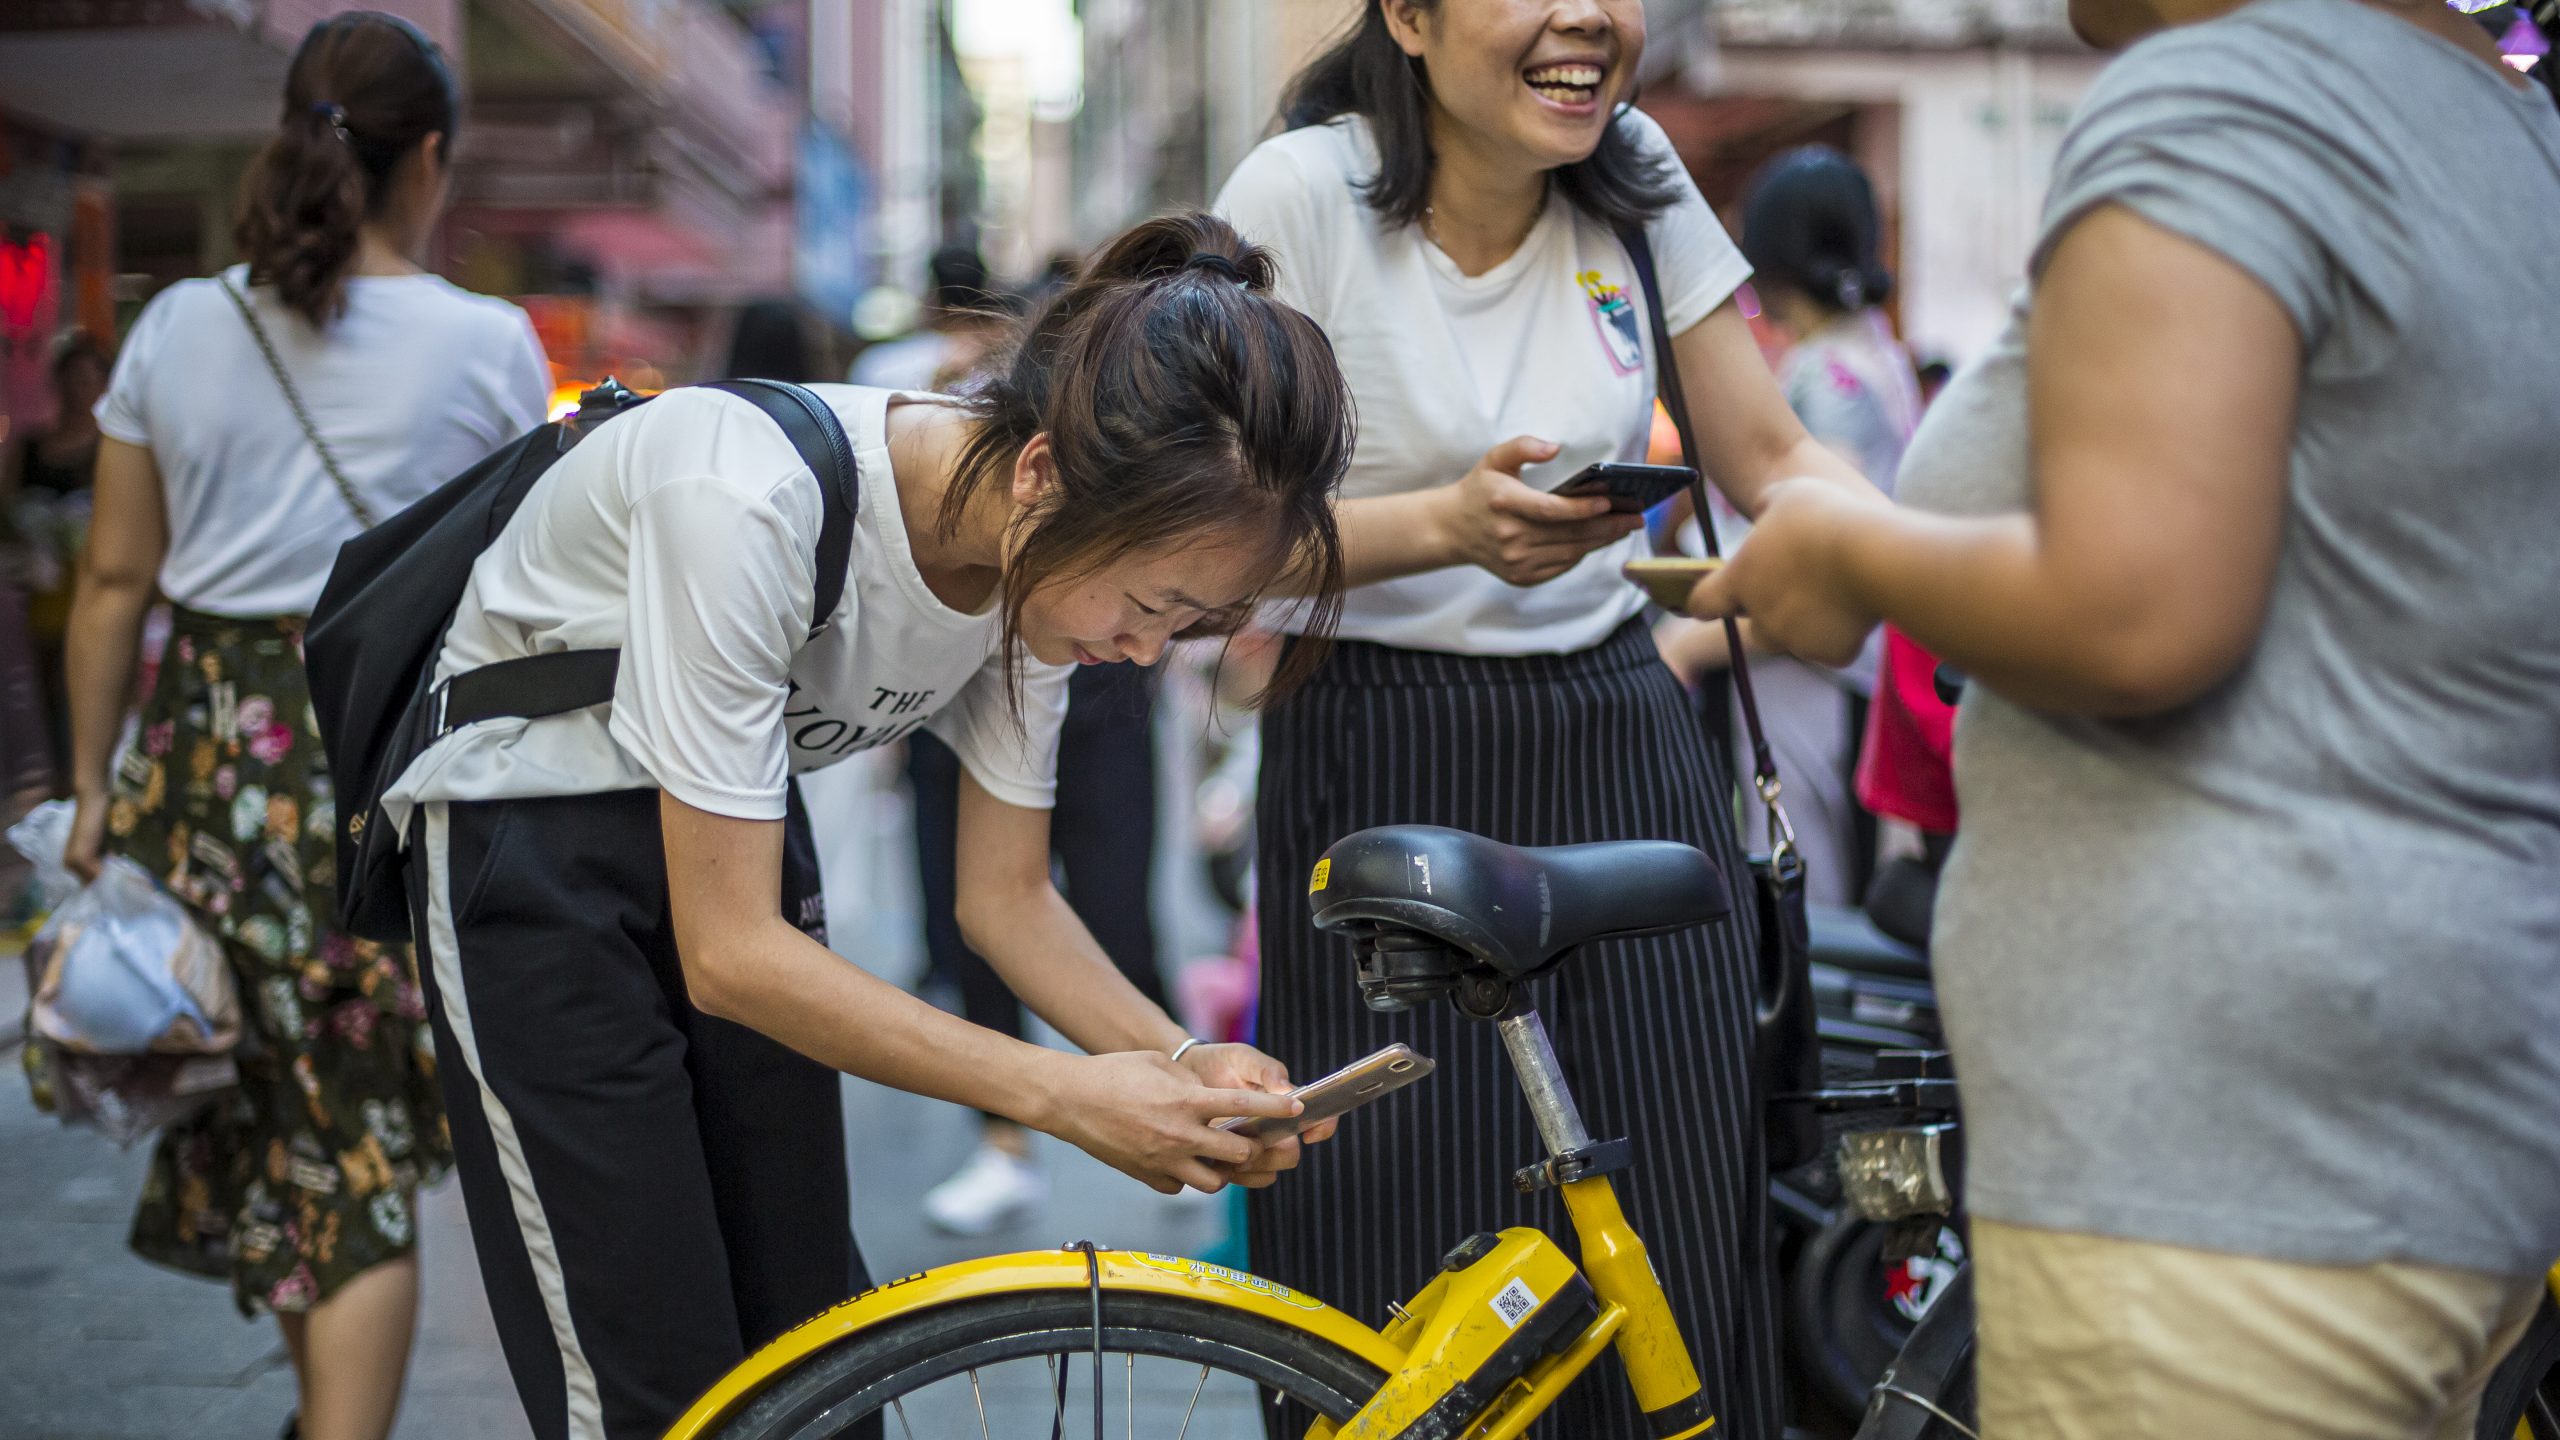 Young women scanning a QR code on a shared bicycle in China - photo by photographer Tuomas Harjumaaskola, China